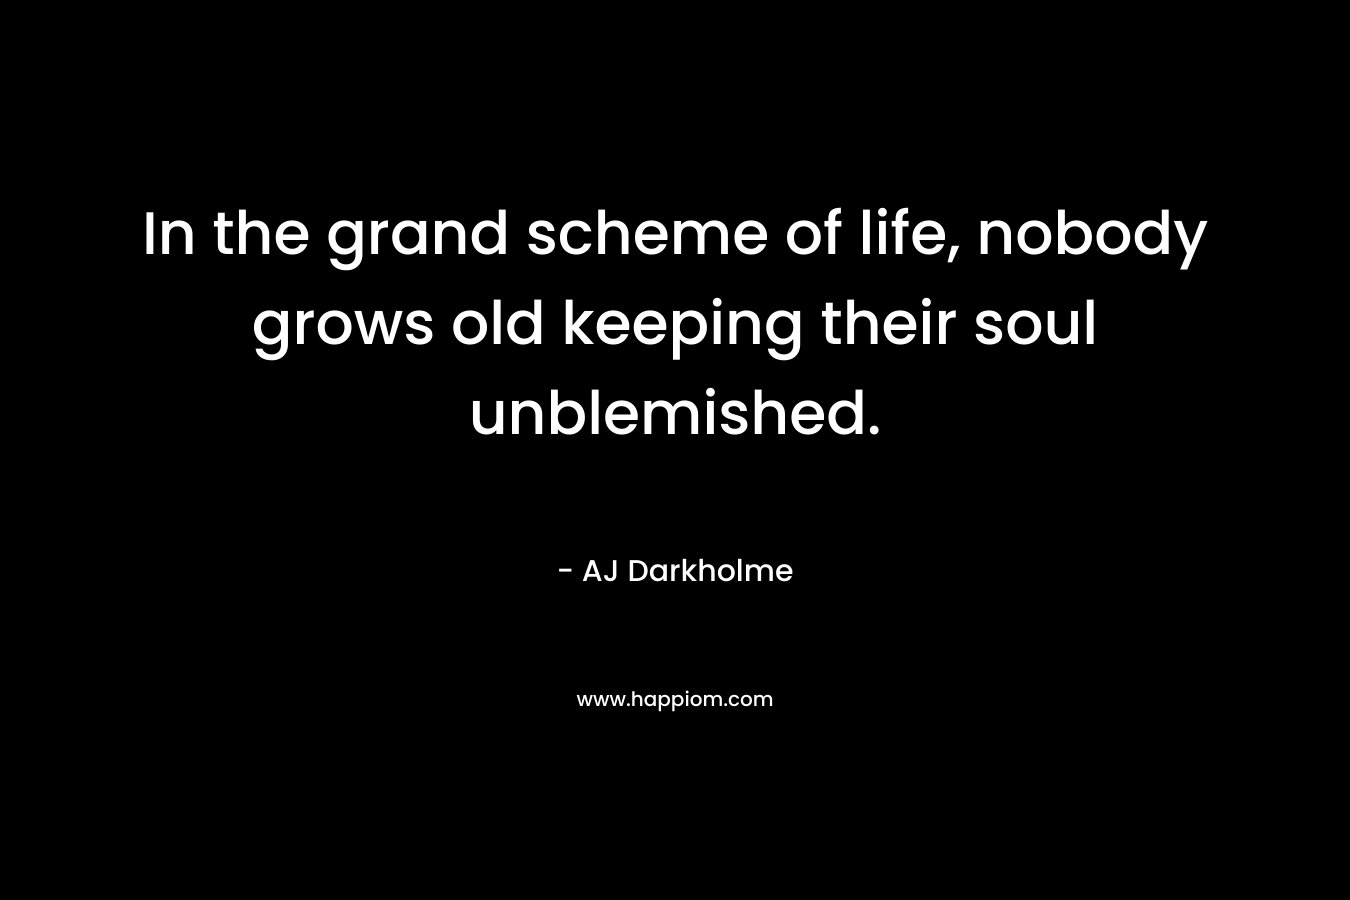 In the grand scheme of life, nobody grows old keeping their soul unblemished. – AJ Darkholme